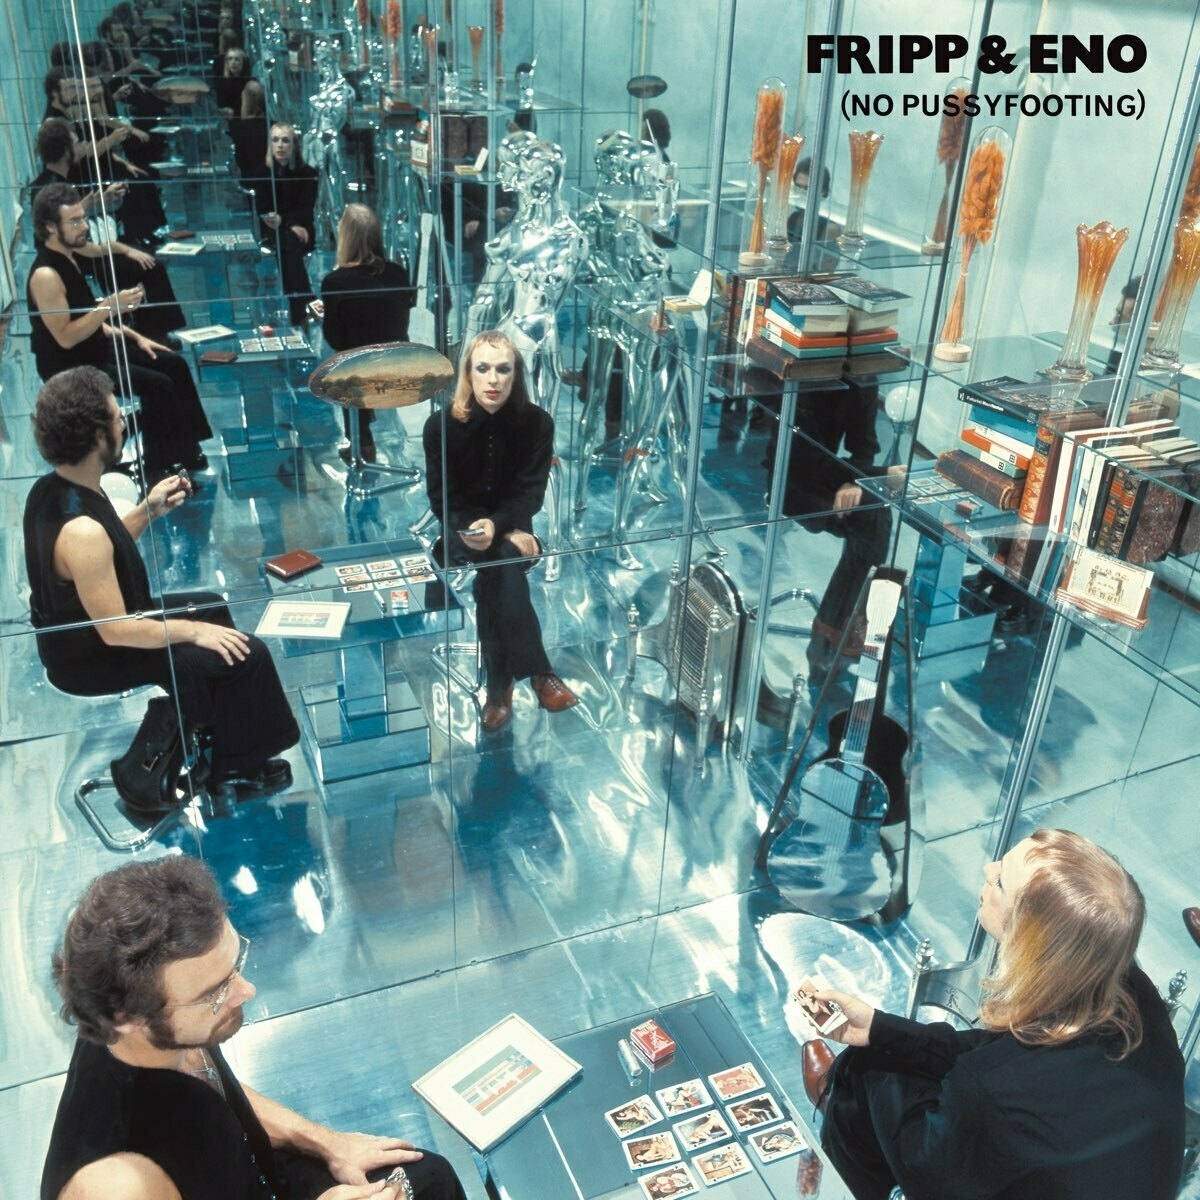 Album cover for Fripp & Eno: No Pussyfooting. Brian Eno is holding a deck of what may be tarot cards. Nine colorful cards are dealt on the table beside him, in three rows of three. There is a small framed painting lying nearby. Eno's pale hair is long and straight, and he is made up with eye shadow, lipstick, and blush. Robert Fripp, wearing glasses and with a neatly trimmed beard which matches his curly head hair, sits facing Eno. They are in a mirror-lined room, so their reflections repeat a dozen or more times into the distance, growing progressively dimmer. A glass shelf is visible over Eno's head, holding a small collection of old leather-bound books. There are many other elements in the small, shiny room that seem indescribable.